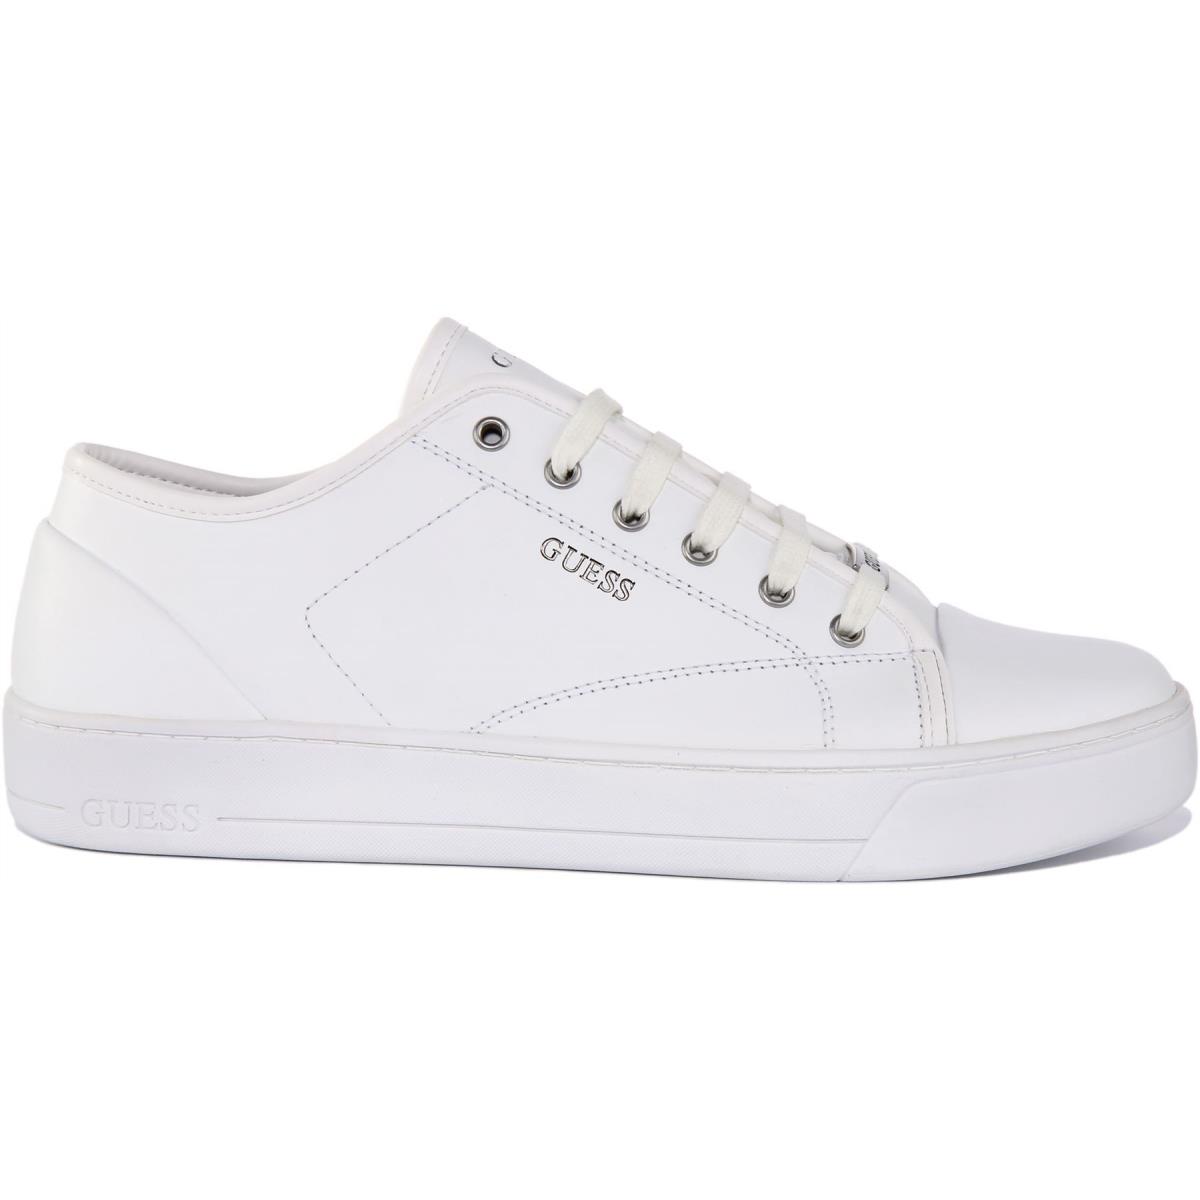 Guess Fm5Udilea12 Udine Mens Lace Up Low Top Sneakers In White Size US 7 - 13